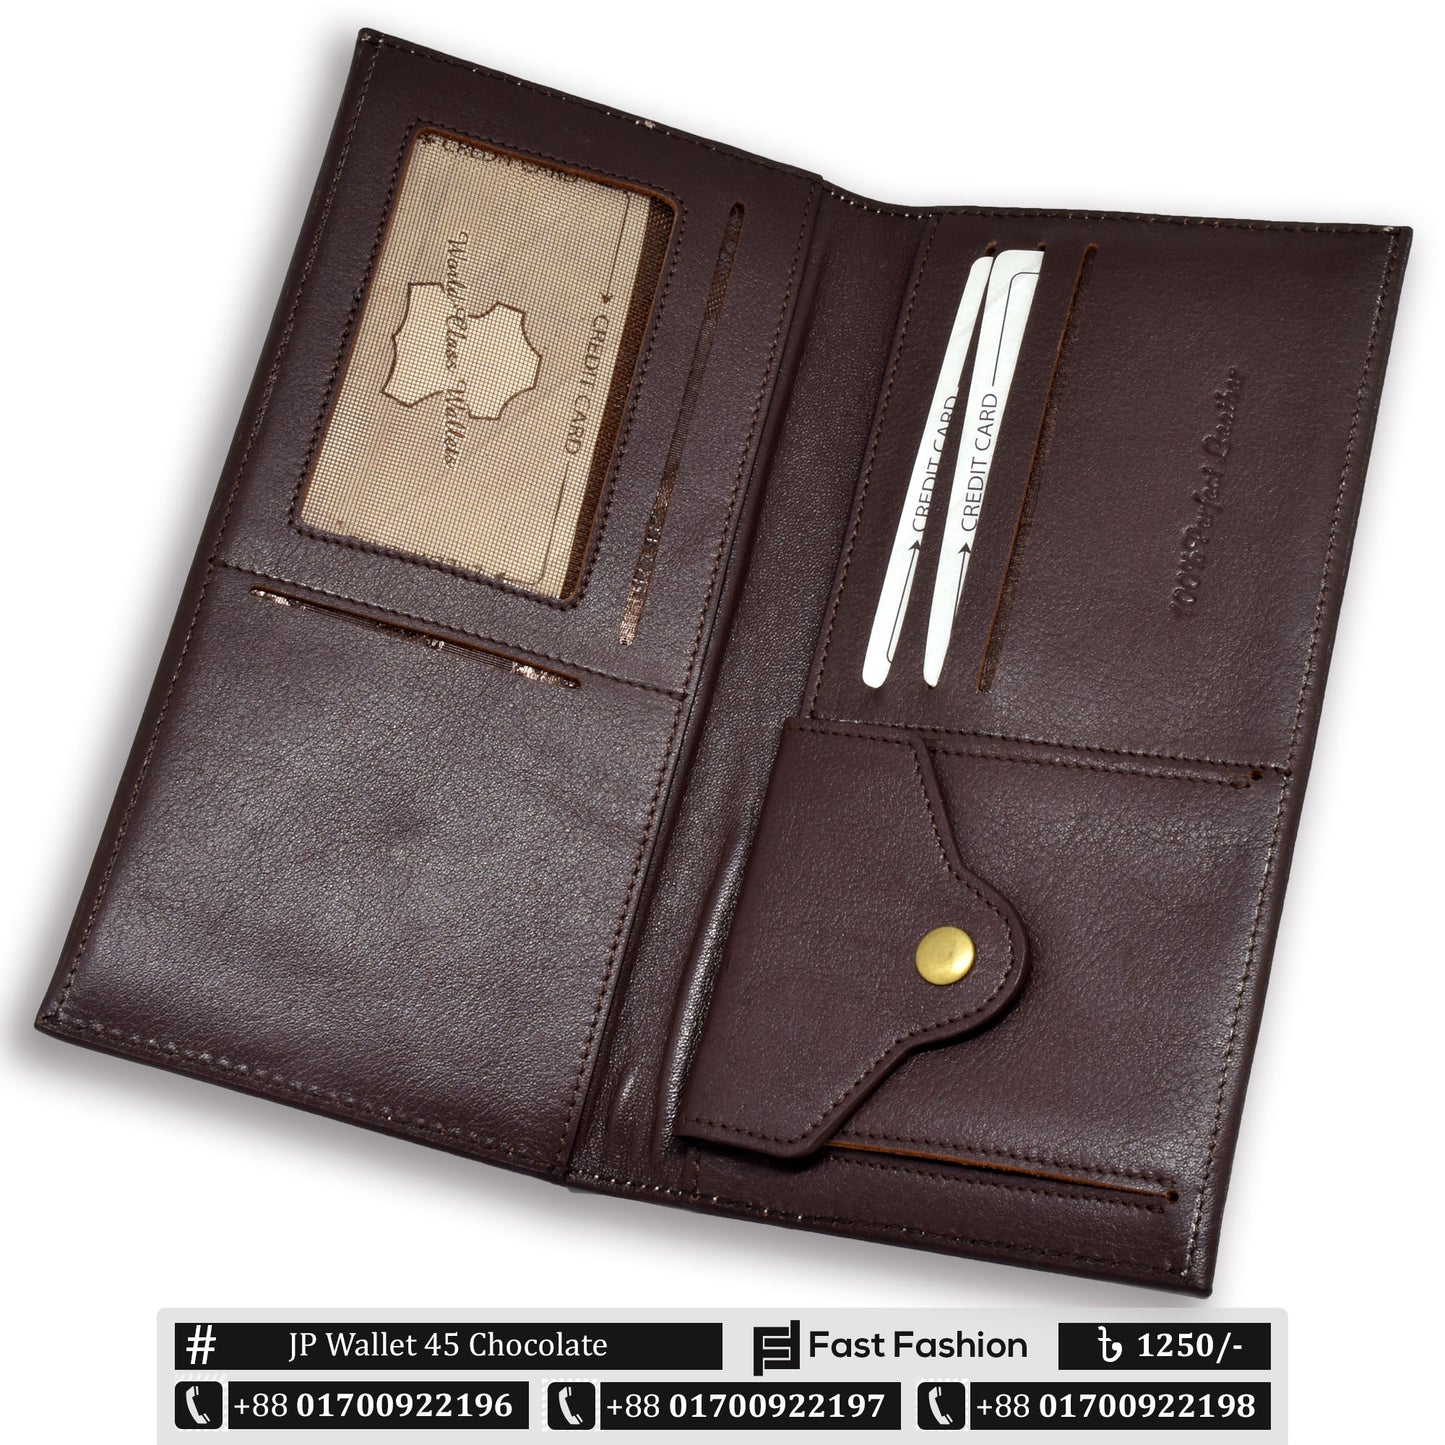 Long Chocolate Color Premium Leather Wallet for Men | JP Wallet 45 Chocolate